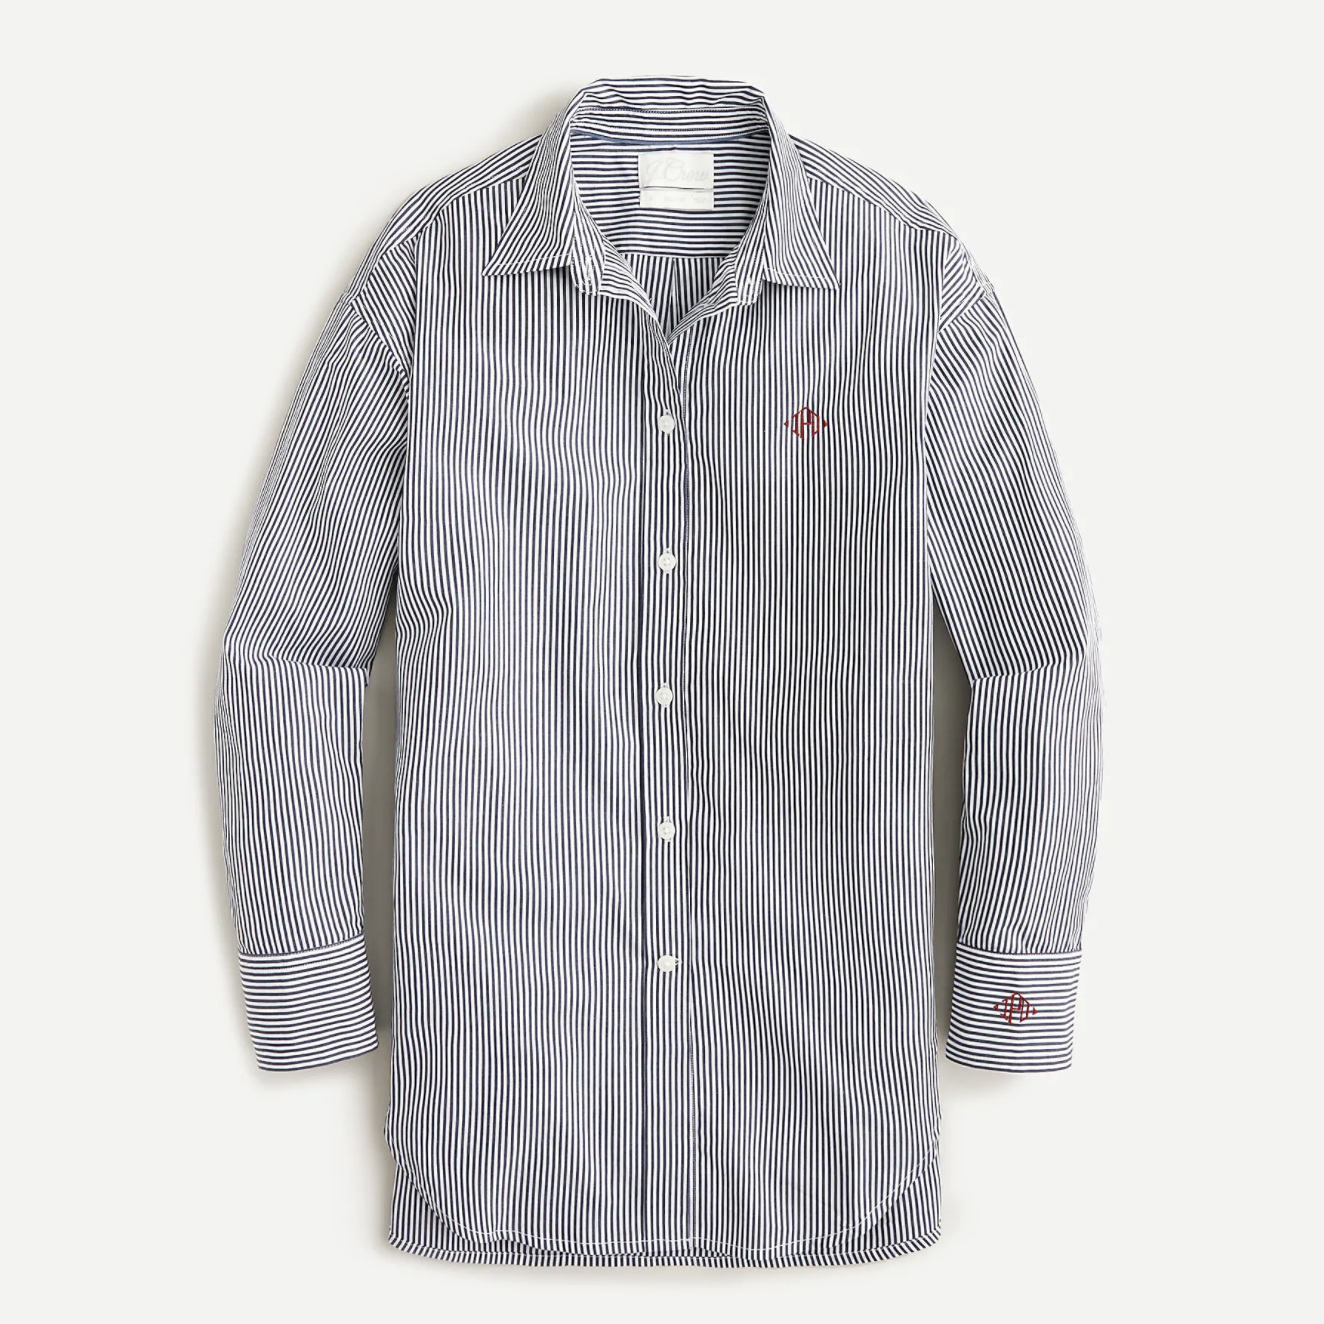 Pointelle Button Down by NAADAM for $69